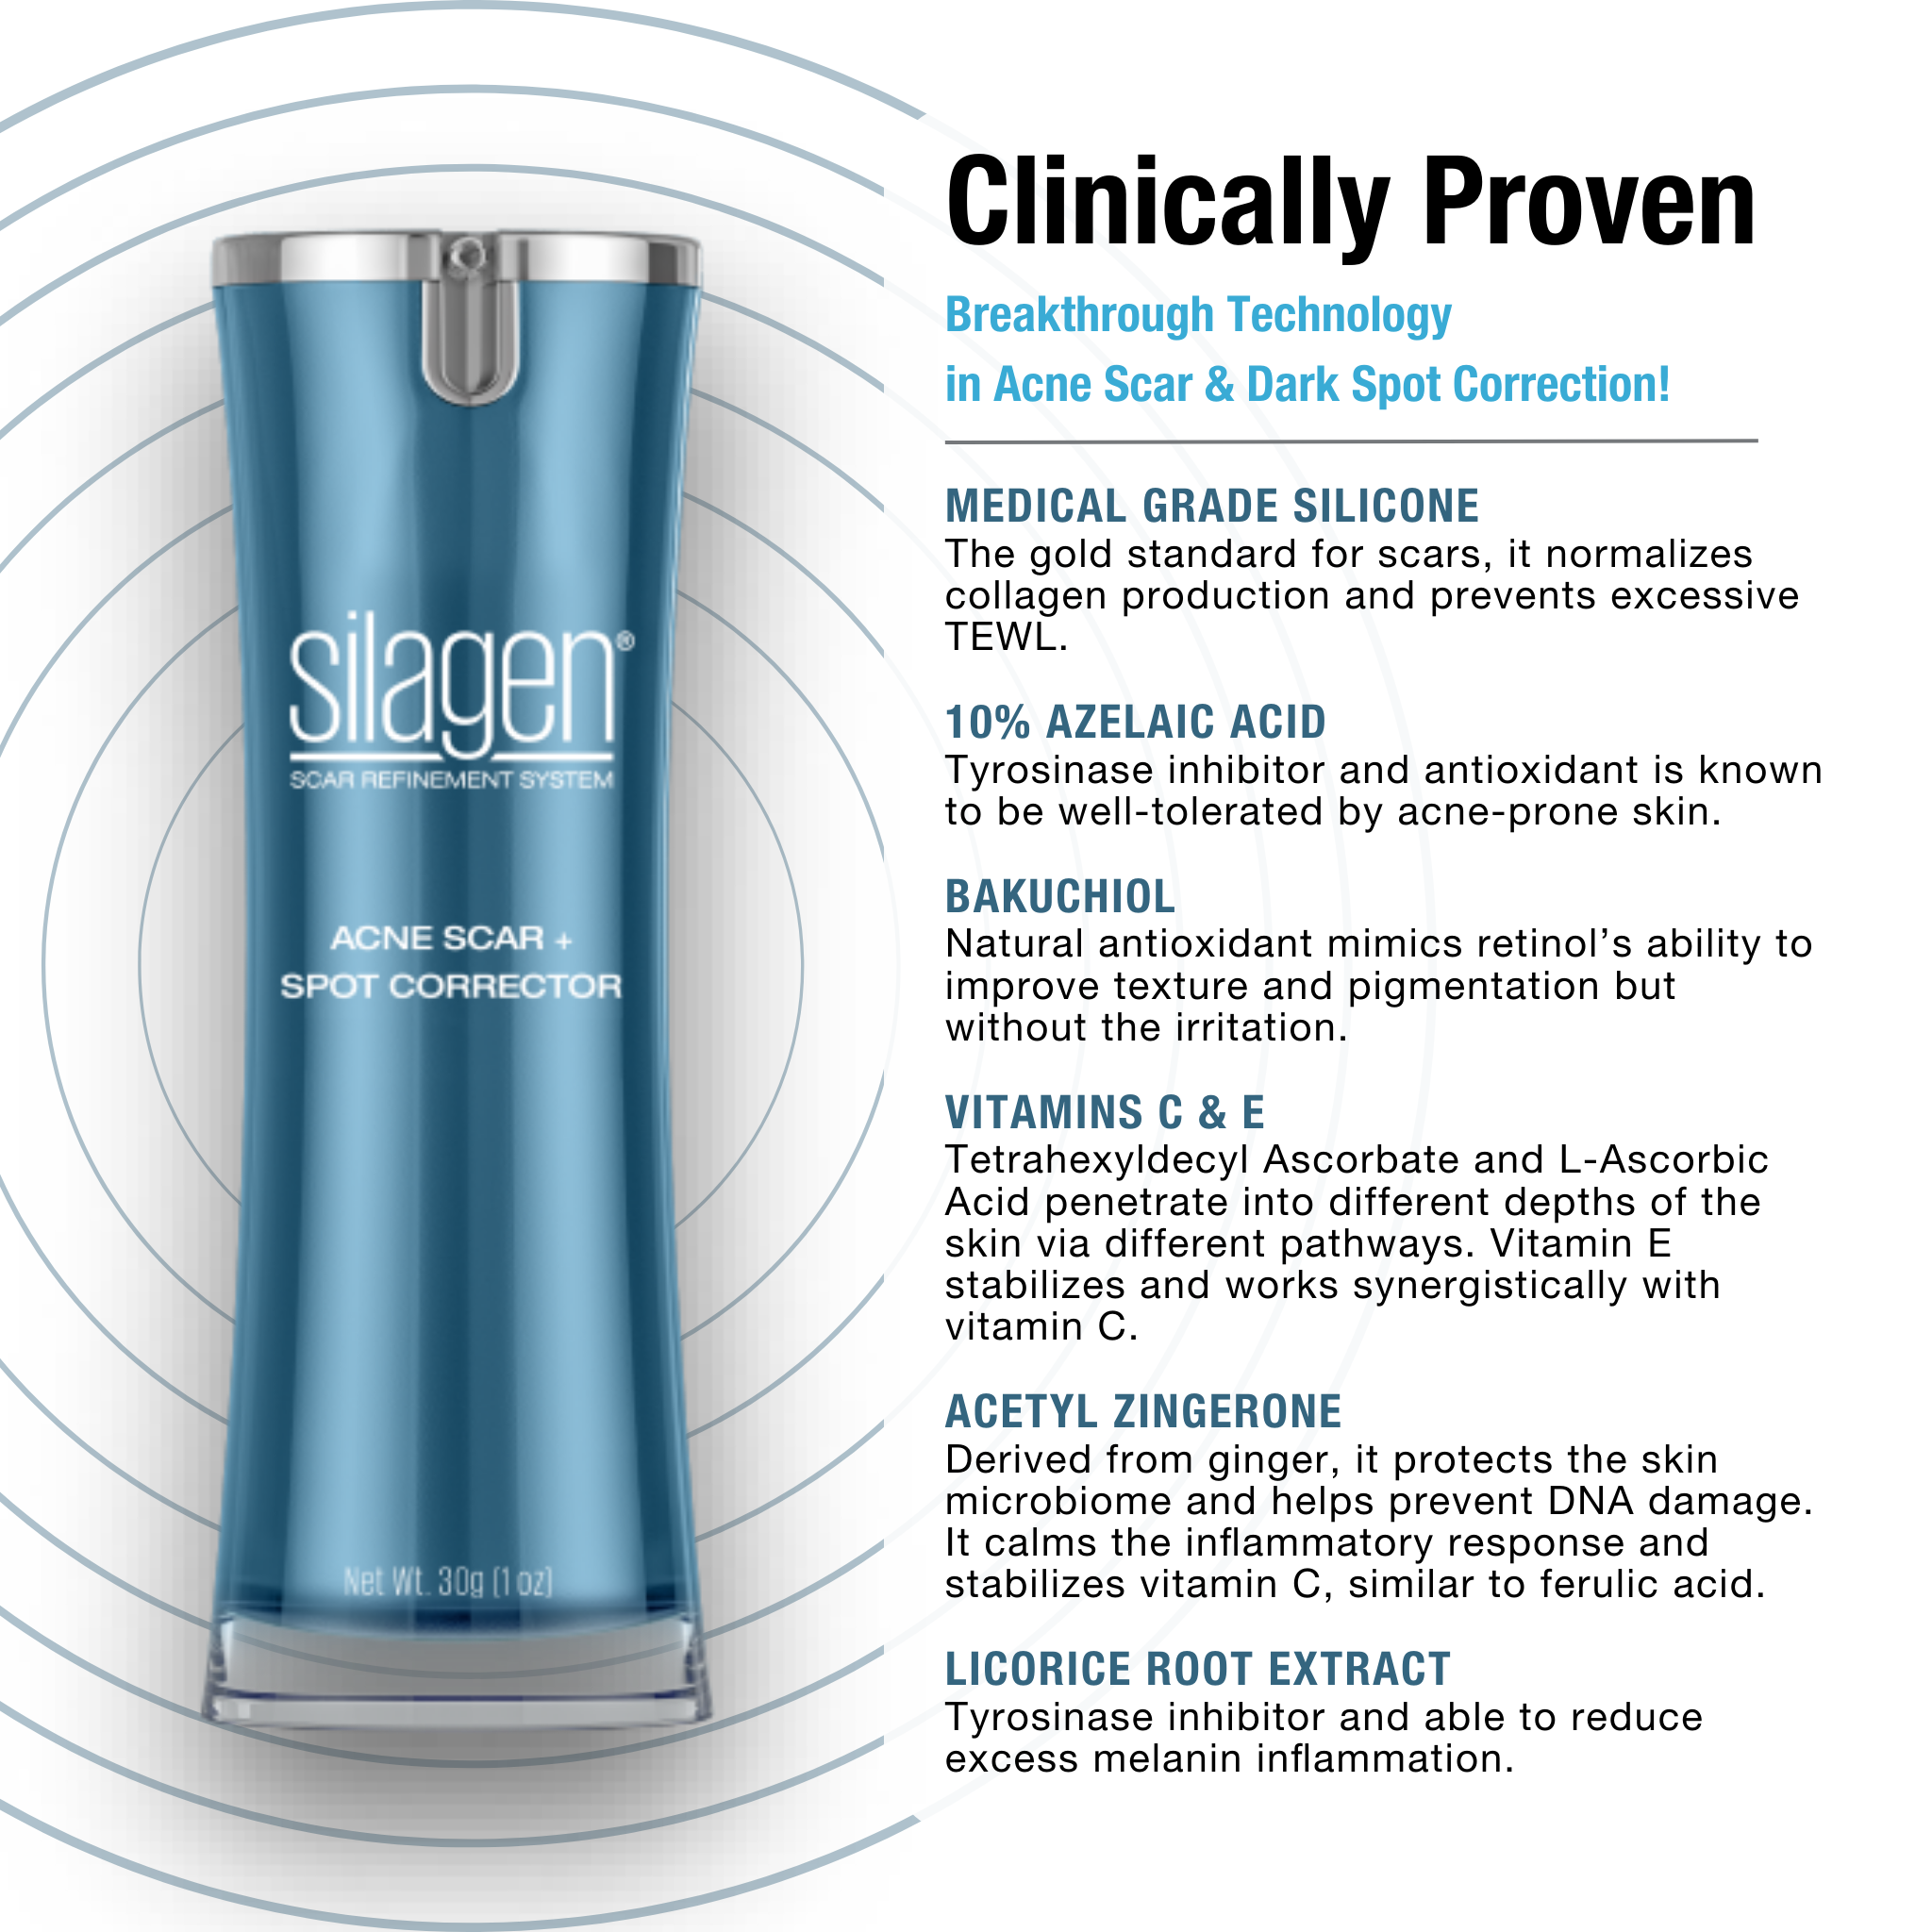 Silagen Clinically Proven 1